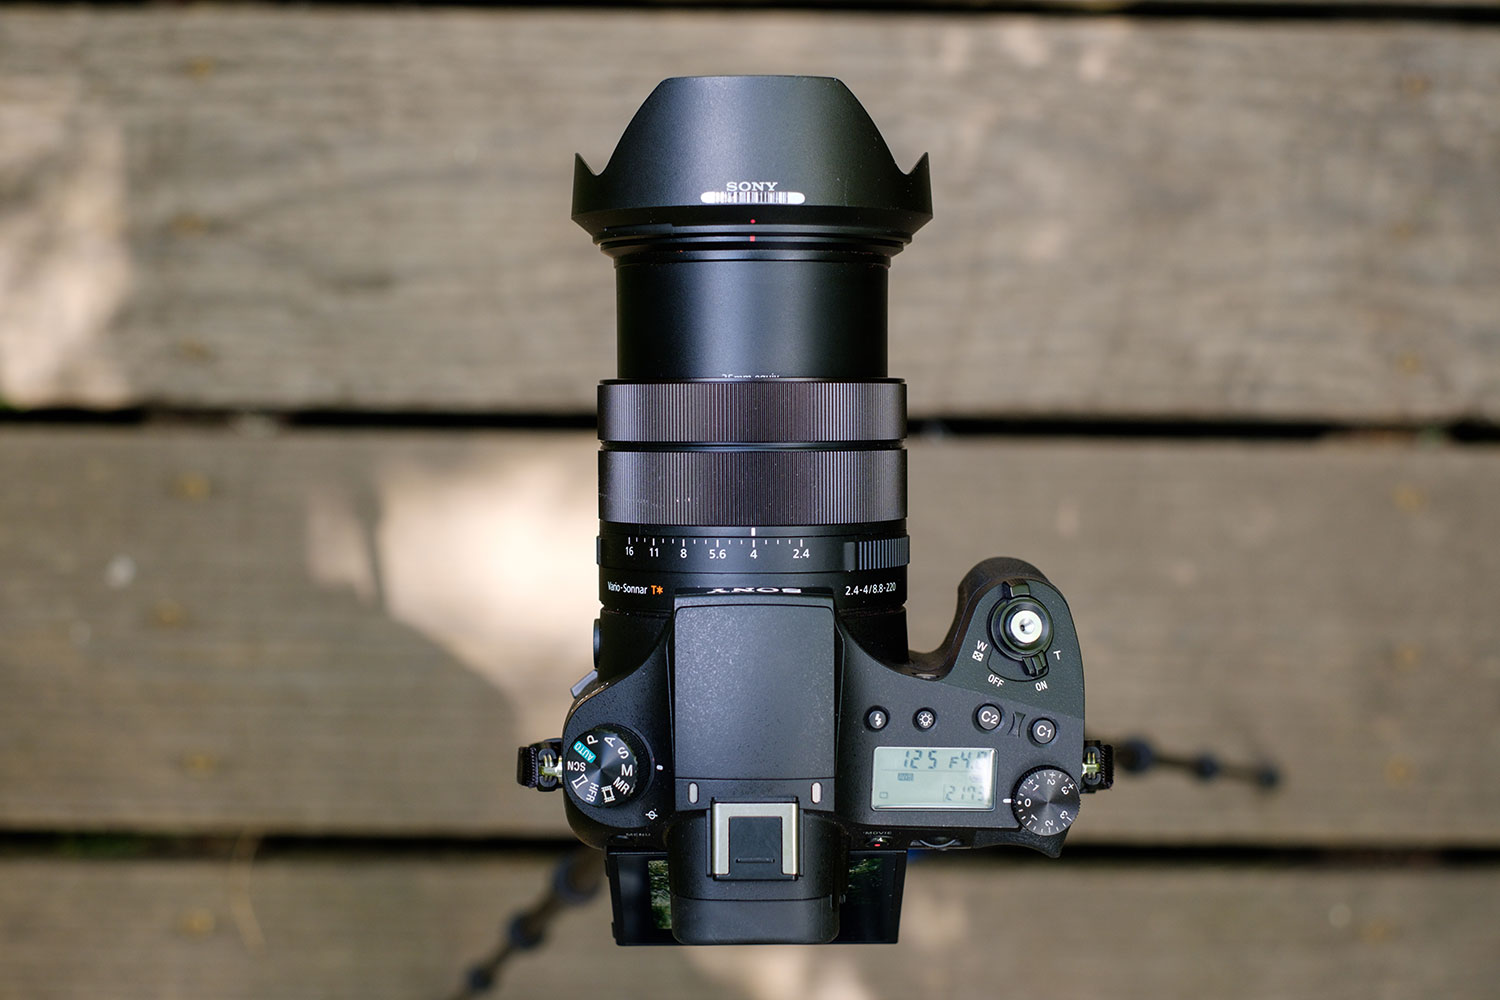 Sony RX10 IV Review: The Best All-in-one Camera from Sony?